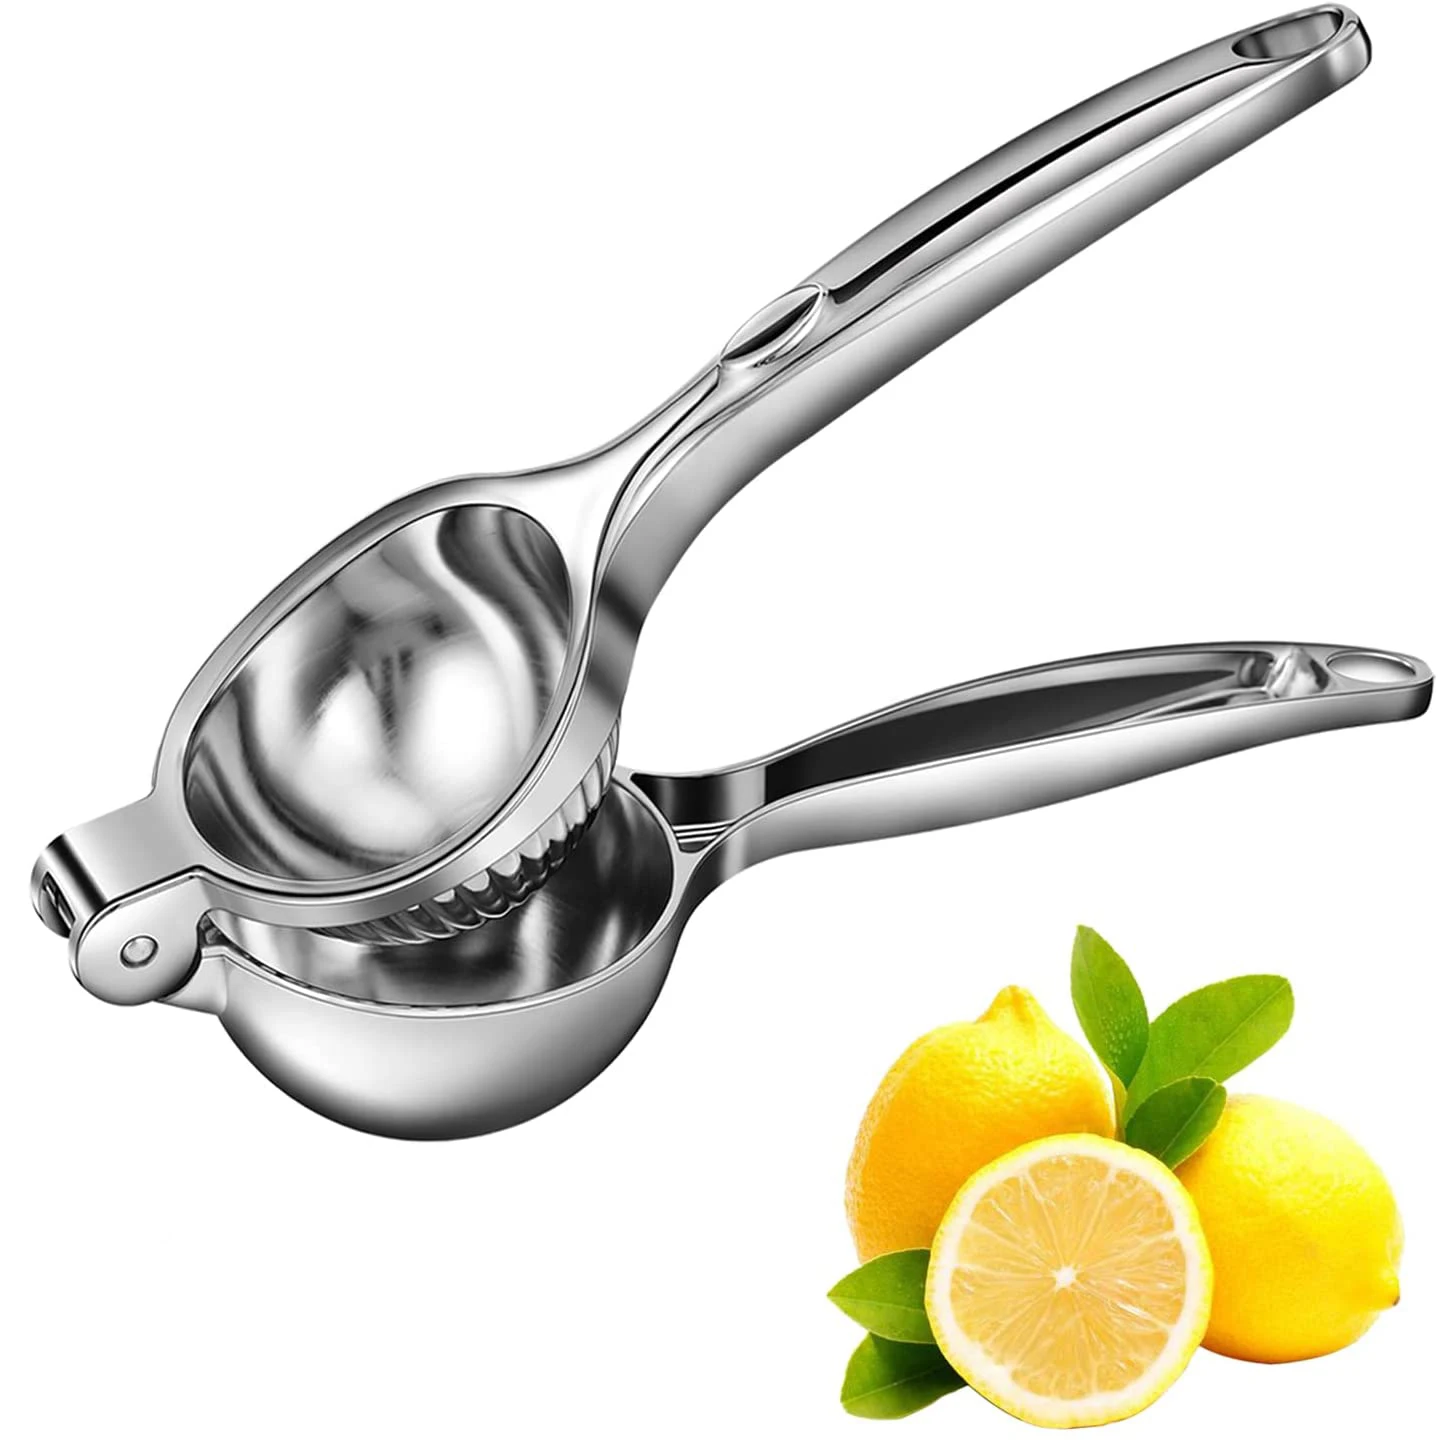 

Kitchen Tools Aluminium Alloy Fruit 2 In 1 Hand Citrus Manual Stainless Steel Juicer Lemon Lime Squeezer, Silver, customizable